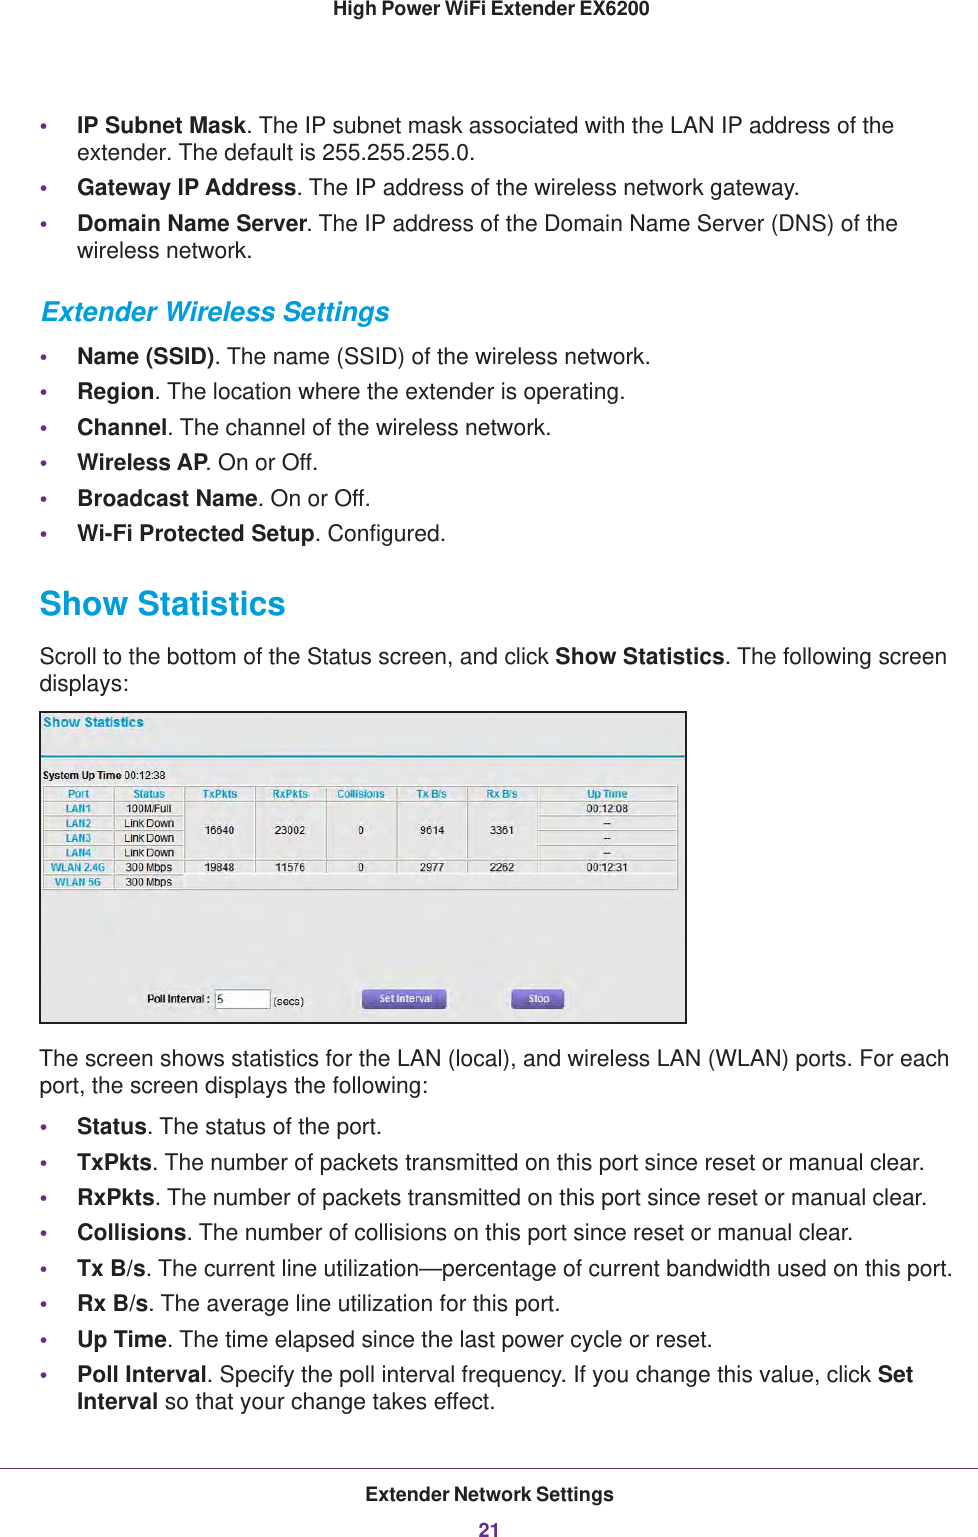 Extender Network Settings21 High Power WiFi Extender EX6200•IP Subnet Mask. The IP subnet mask associated with the LAN IP address of the extender. The default is 255.255.255.0.•Gateway IP Address. The IP address of the wireless network gateway.•Domain Name Server. The IP address of the Domain Name Server (DNS) of the wireless network.Extender Wireless Settings•Name (SSID). The name (SSID) of the wireless network.•Region. The location where the extender is operating.•Channel. The channel of the wireless network.•Wireless AP. On or Off.•Broadcast Name. On or Off.•Wi-Fi Protected Setup. Configured.Show StatisticsScroll to the bottom of the Status screen, and click Show Statistics. The following screen displays:The screen shows statistics for the LAN (local), and wireless LAN (WLAN) ports. For each port, the screen displays the following:•Status. The status of the port.•TxPkts. The number of packets transmitted on this port since reset or manual clear.•RxPkts. The number of packets transmitted on this port since reset or manual clear.•Collisions. The number of collisions on this port since reset or manual clear.•Tx B/s. The current line utilization—percentage of current bandwidth used on this port.•Rx B/s. The average line utilization for this port.•Up Time. The time elapsed since the last power cycle or reset.•Poll Interval. Specify the poll interval frequency. If you change this value, click Set Interval so that your change takes effect.